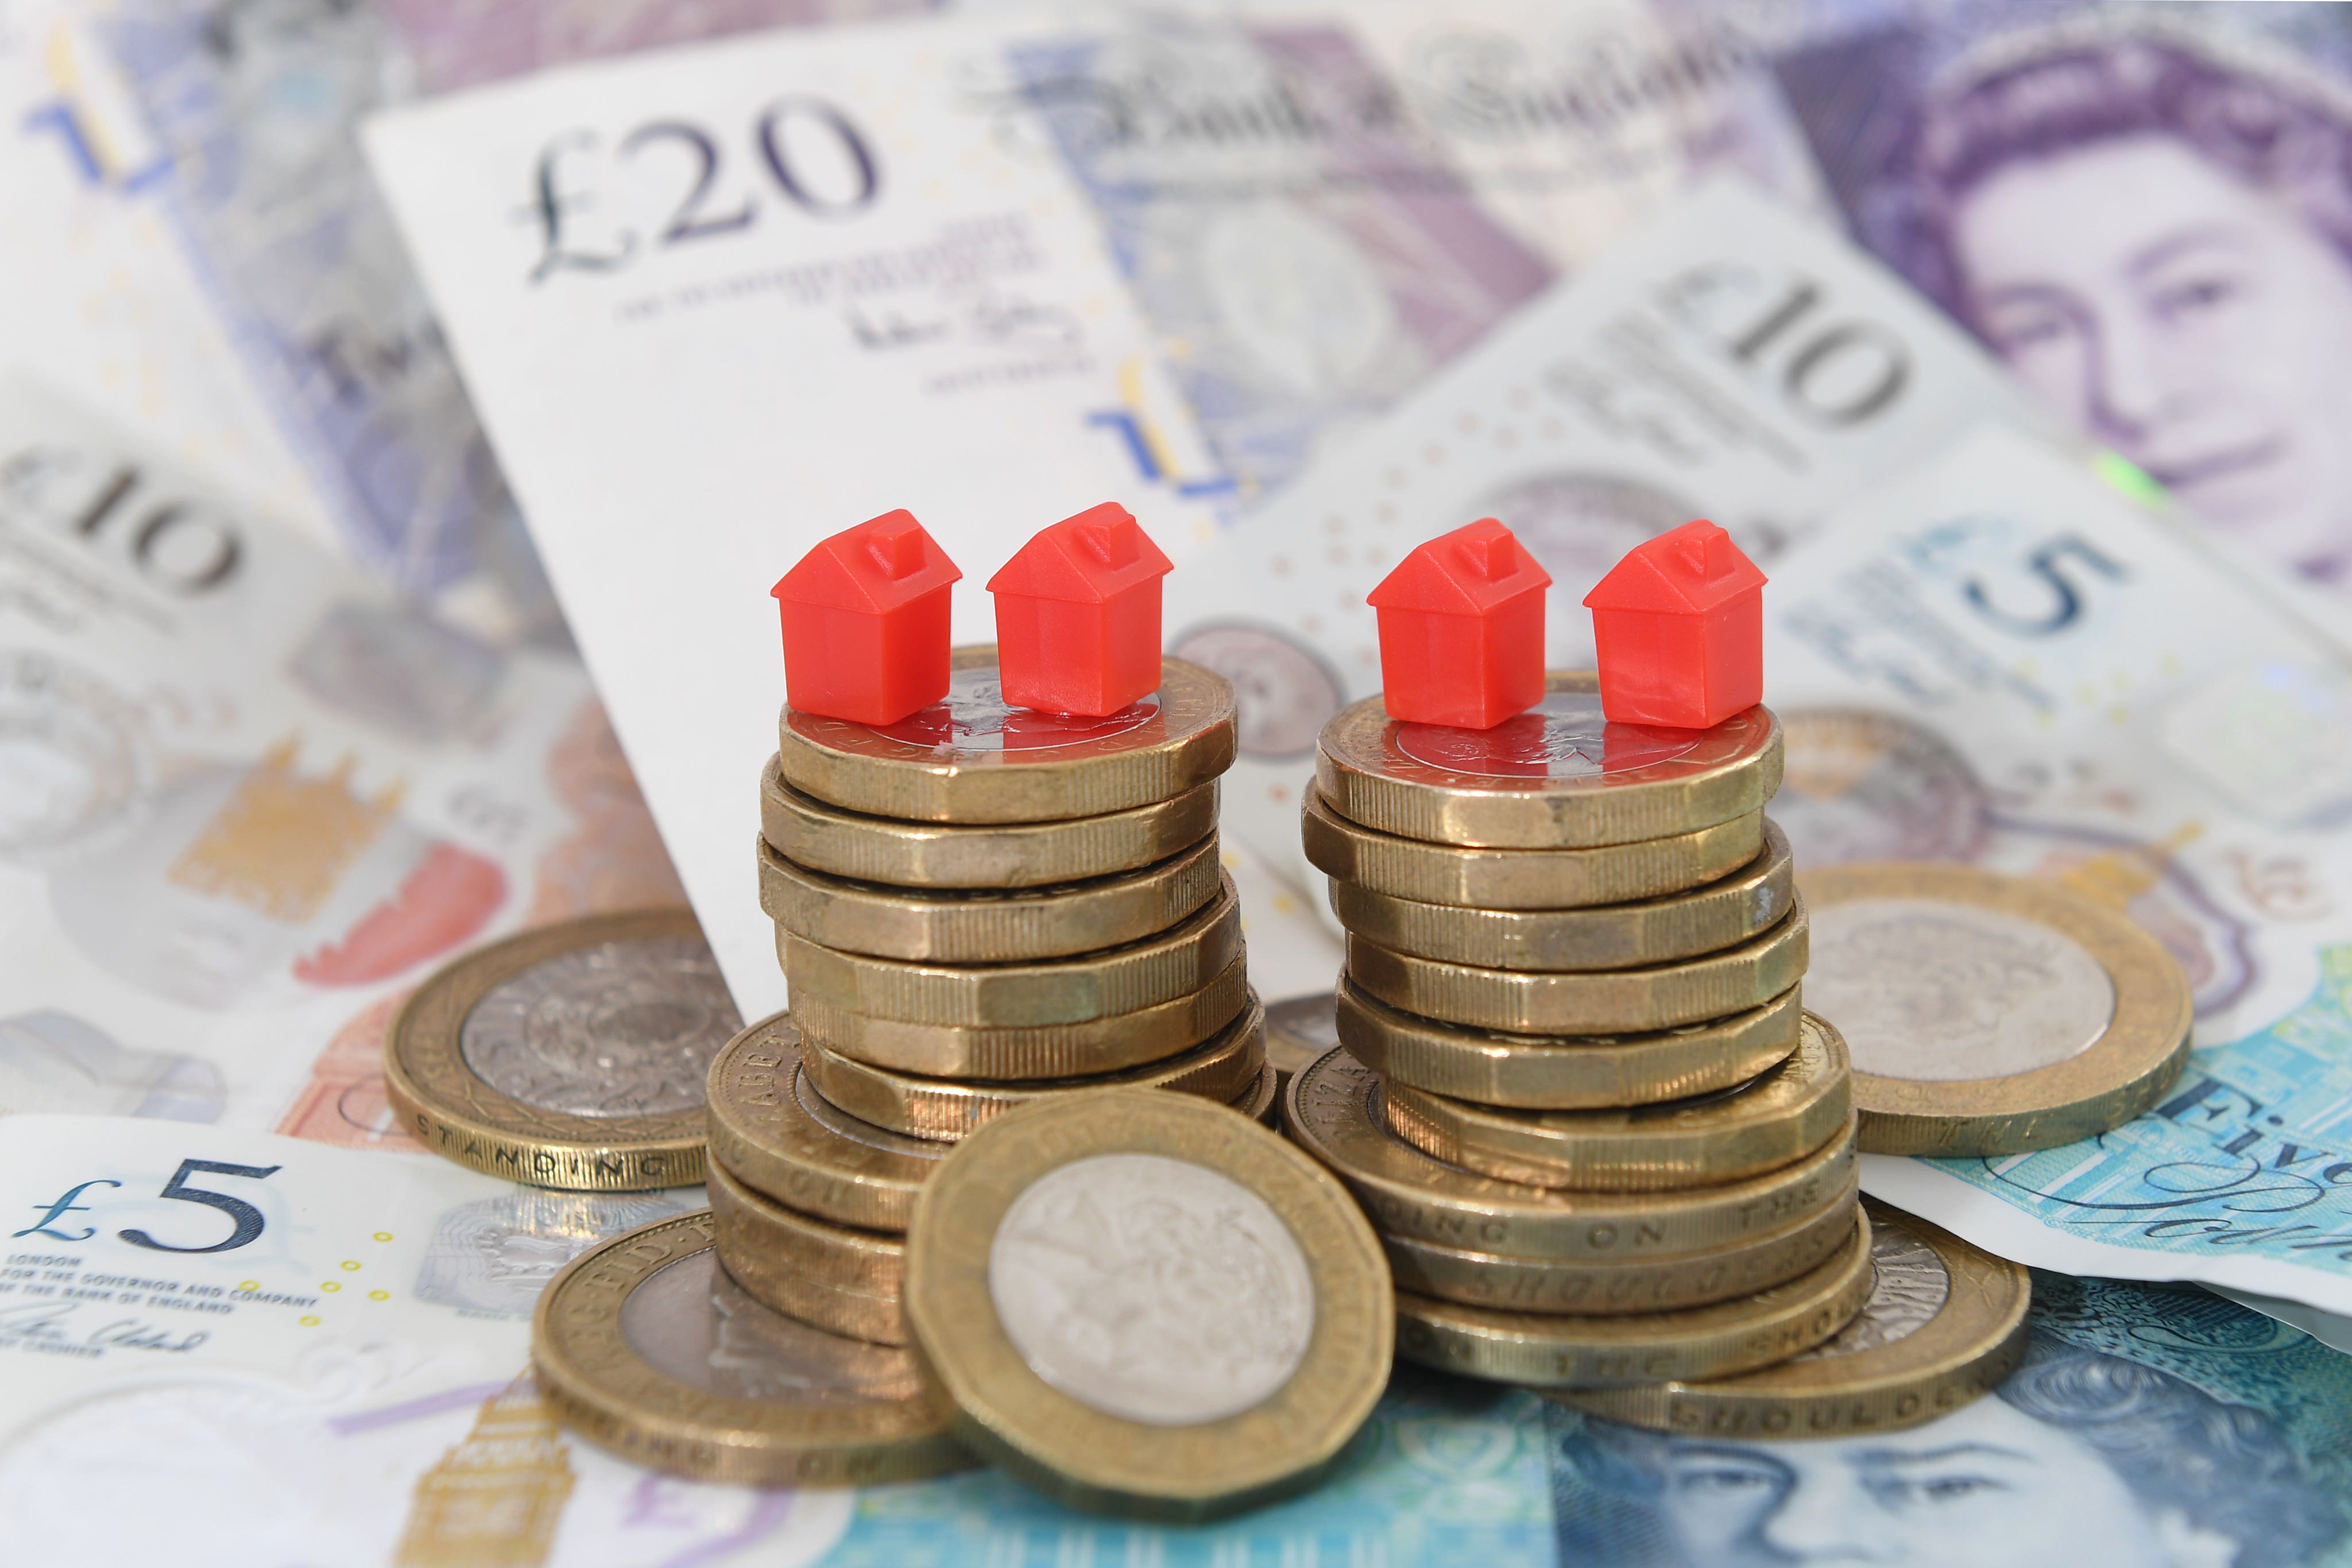 Mortgage rates down but shared ownership is still the only way for some